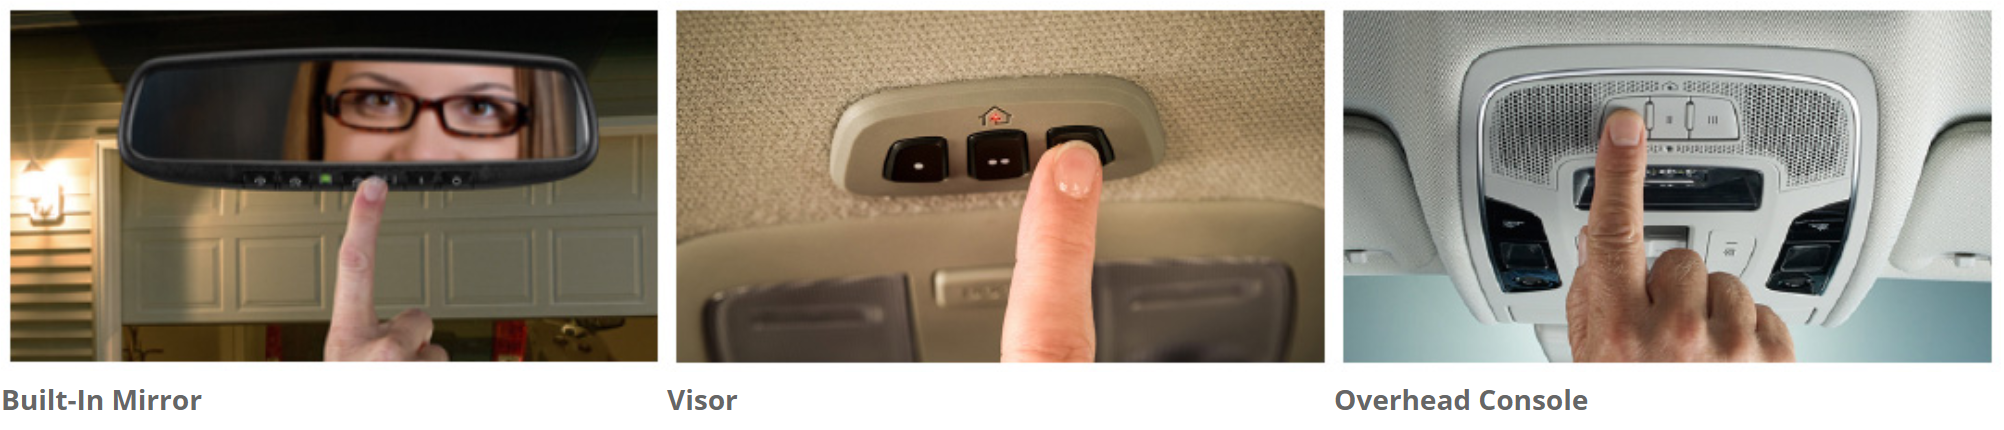 Chamberlain MyQ HomeLink Vehicle System: If you have HomeLink built into your vehicle's interior (such as the mirror, visor, or overhead console), you can program it to control the Garage Door Opener.